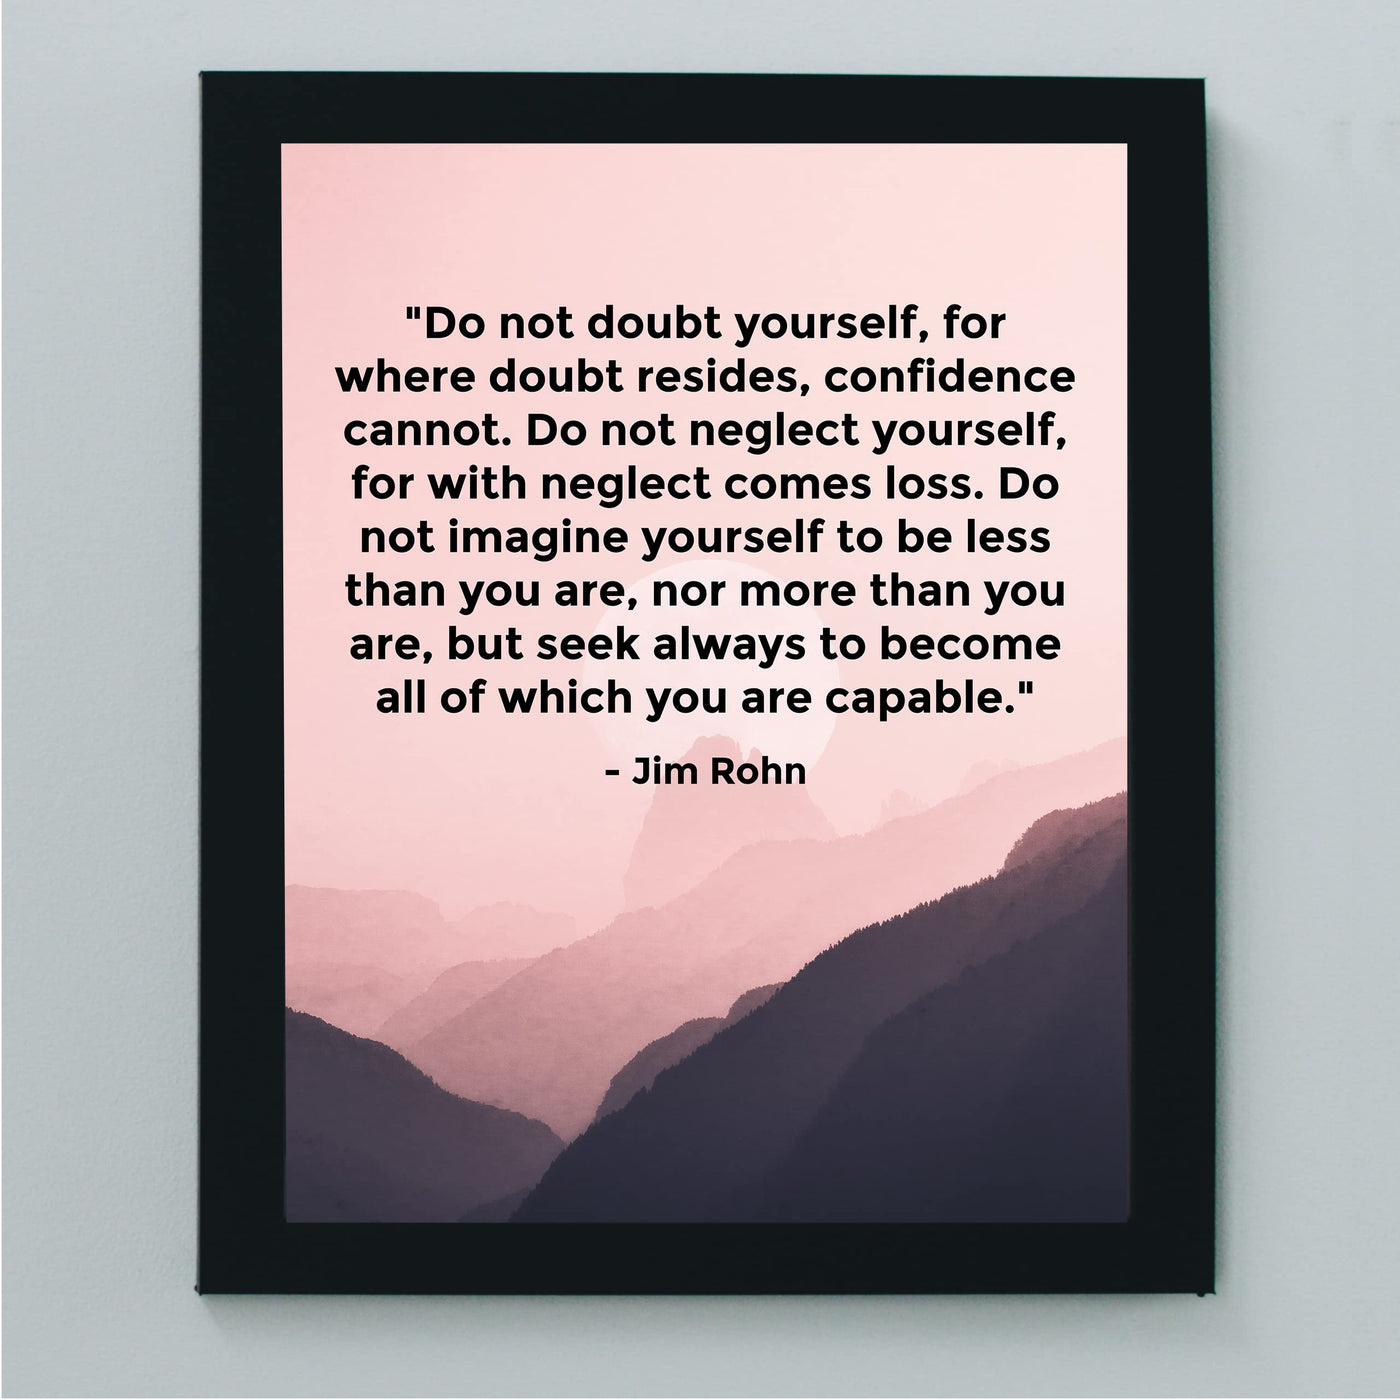 Do Not Doubt Yourself-Seek To Become All-Jim Rohn Motivational Quotes Wall Art-8 x 10" Inspirational Mountain Photo Print-Ready to Frame. Modern Home-School-Office Decor. Great Gift of Motivation!